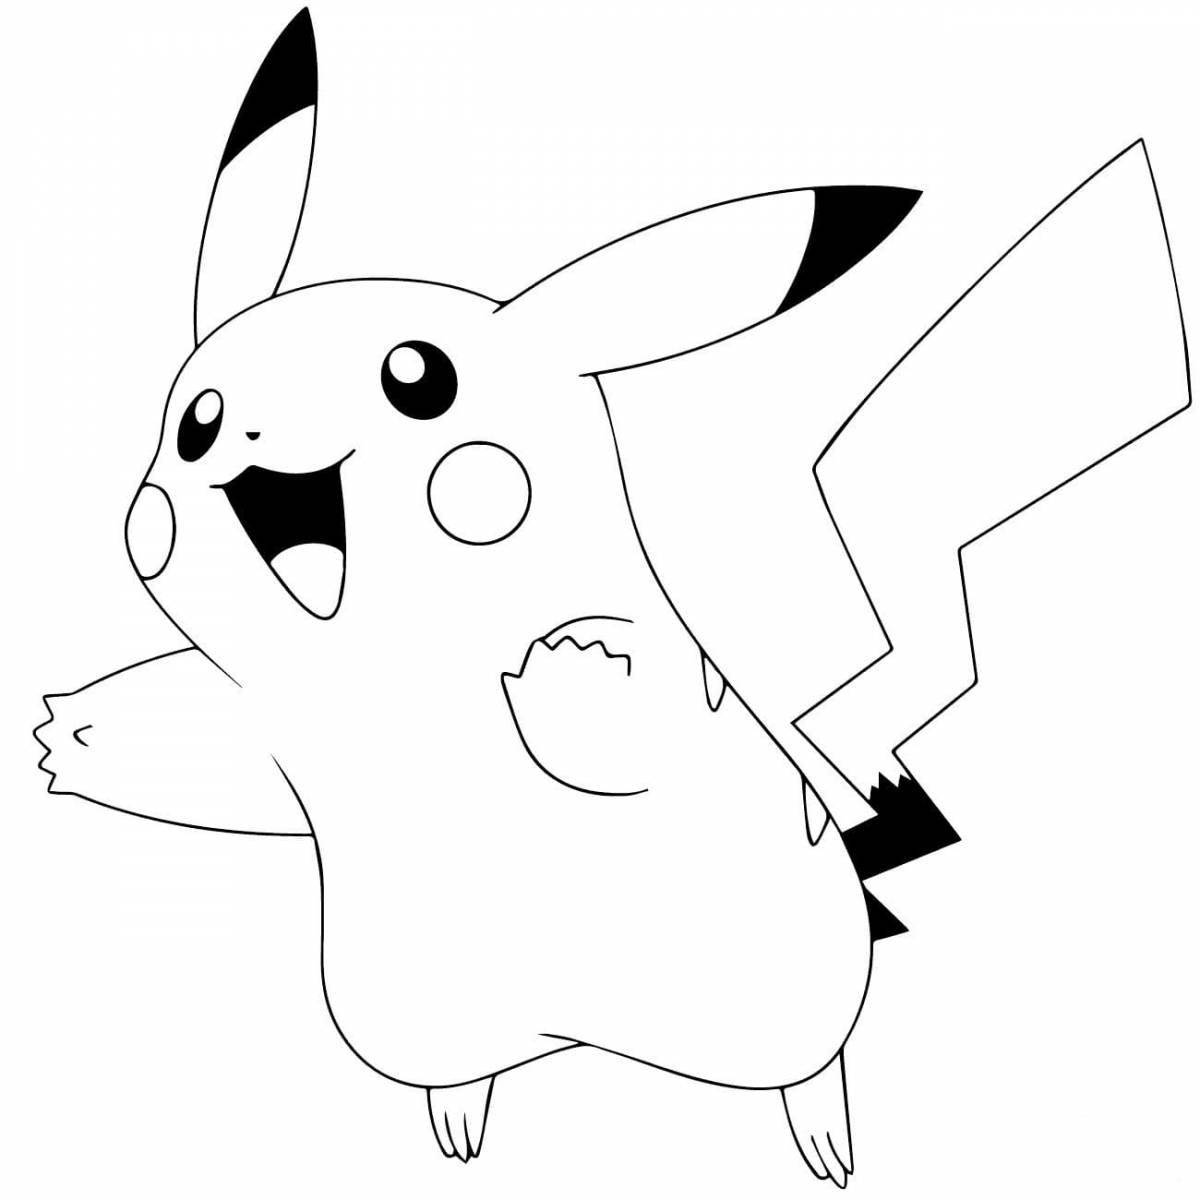 Pikachu fairy numbers coloring book